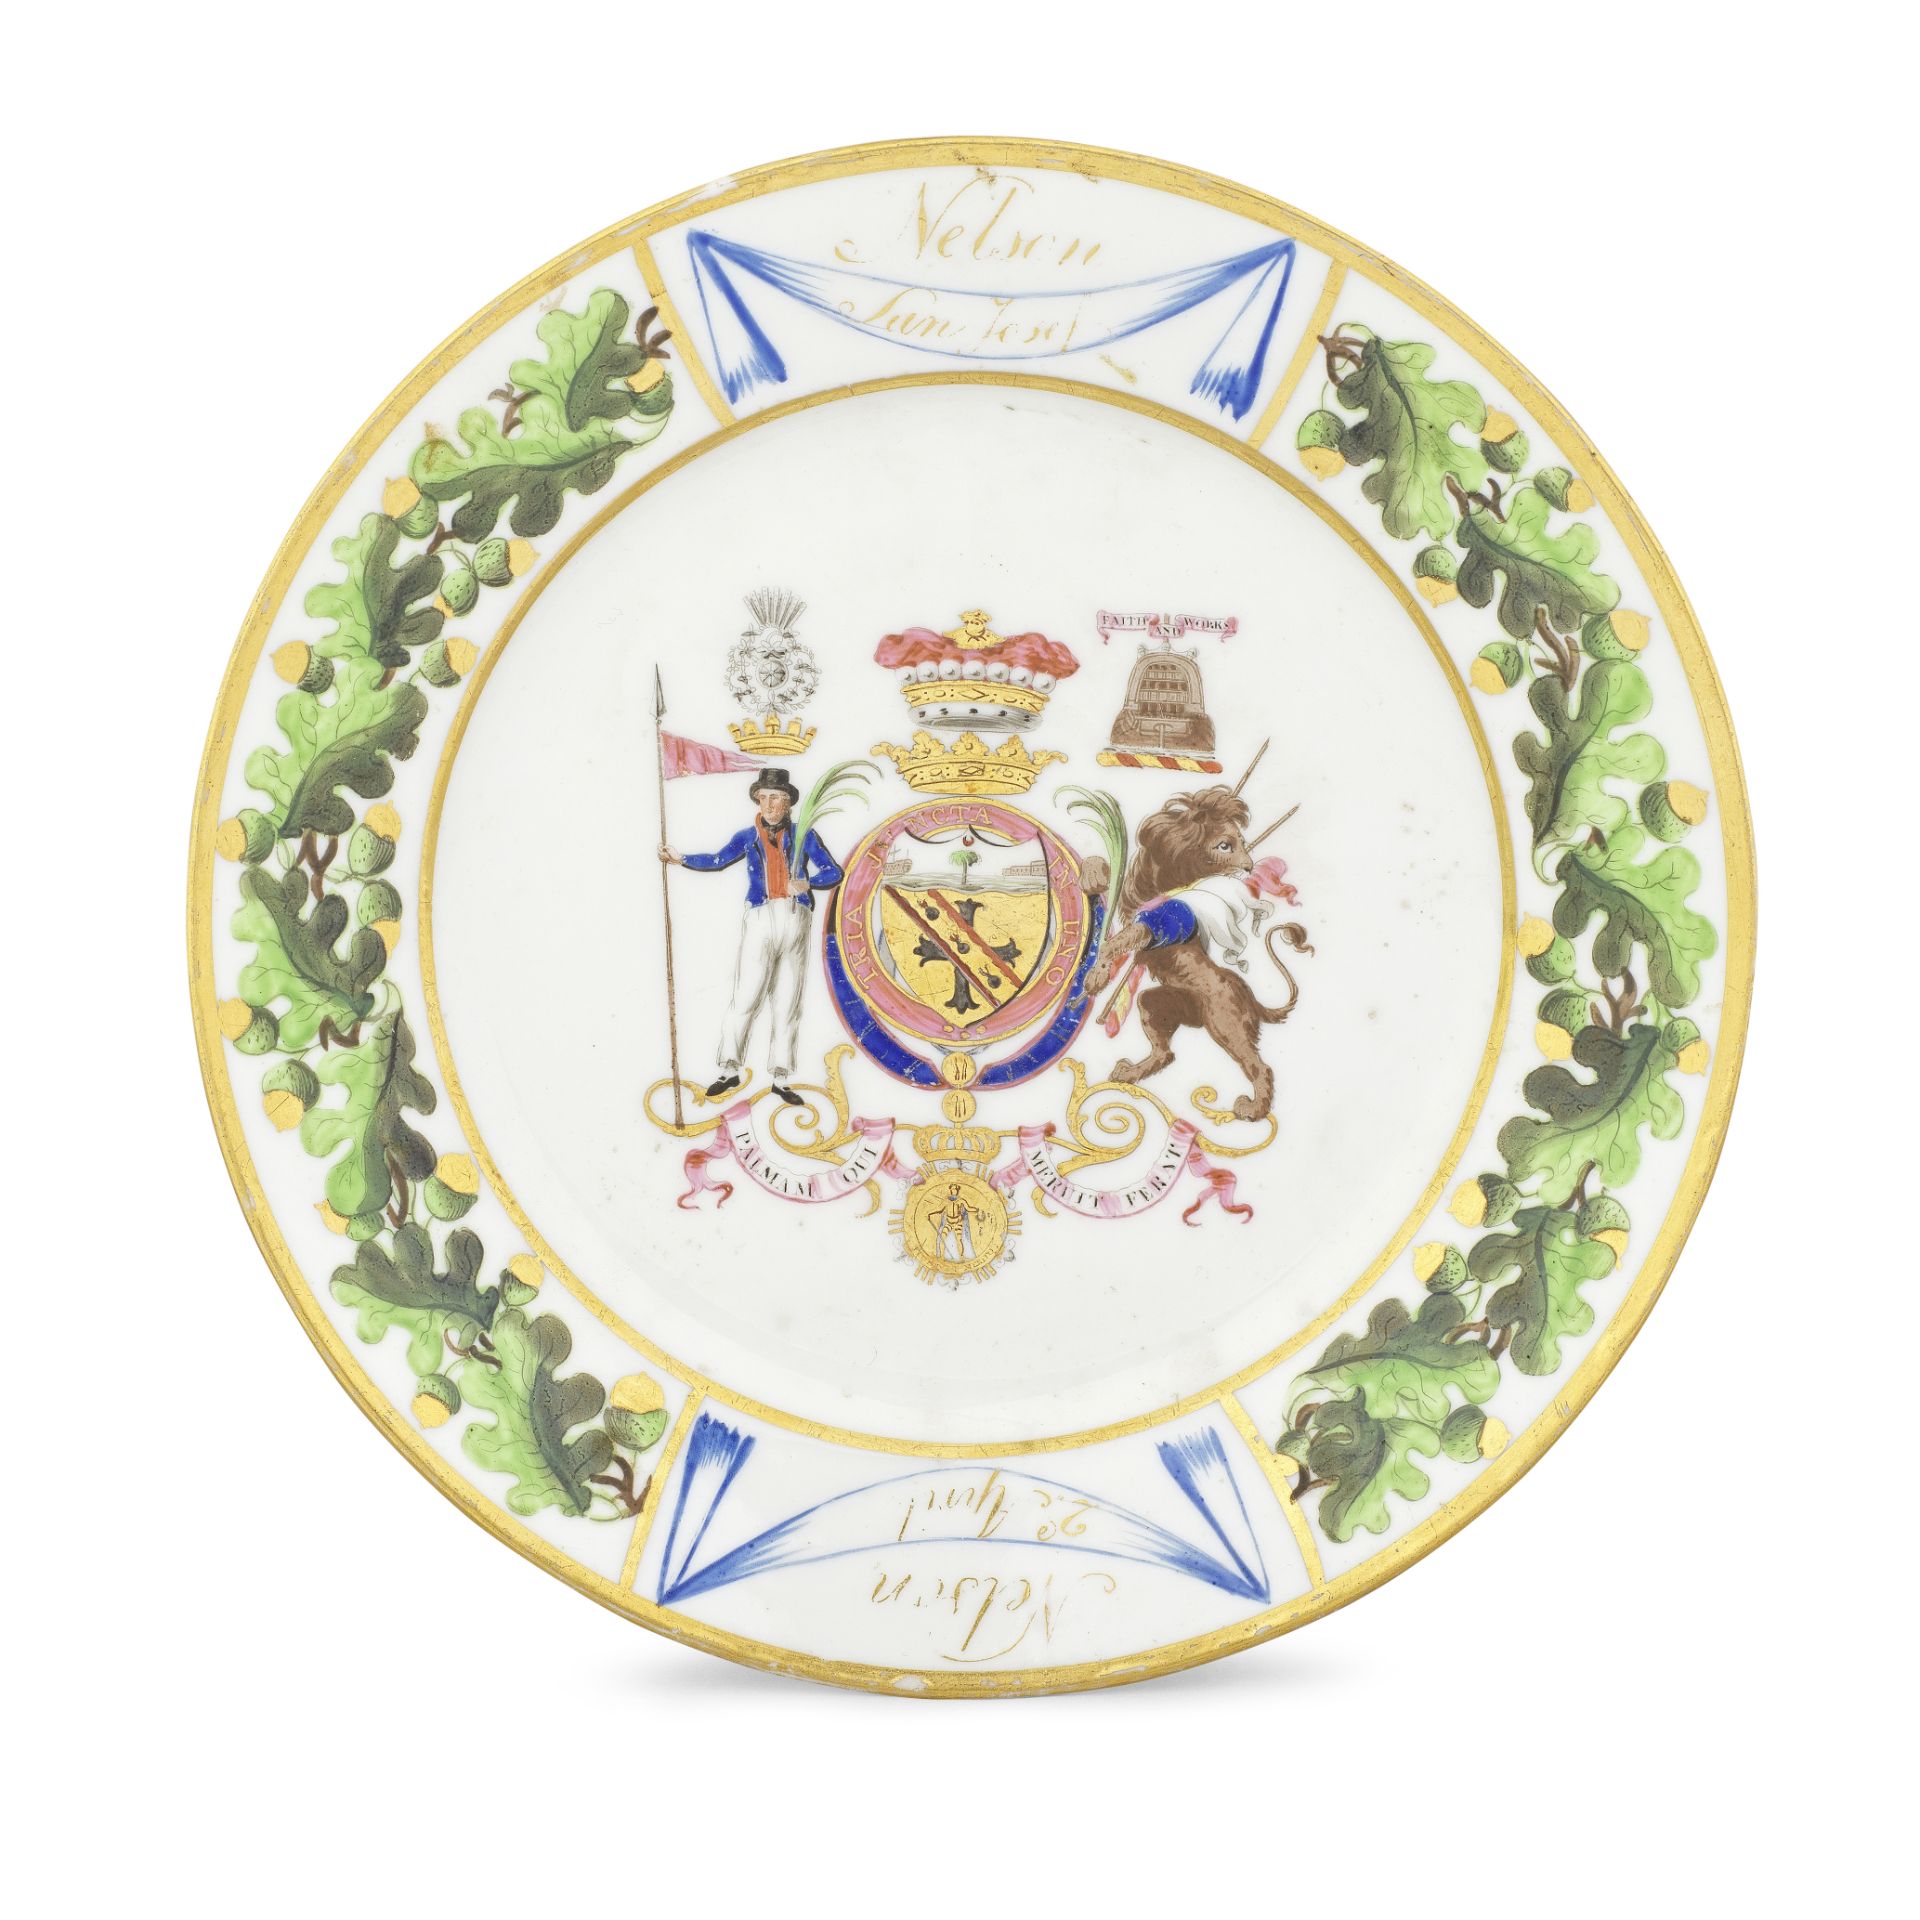 Another London-decorated Paris plate from the 'Nelson Set Dessert Service', circa 1802